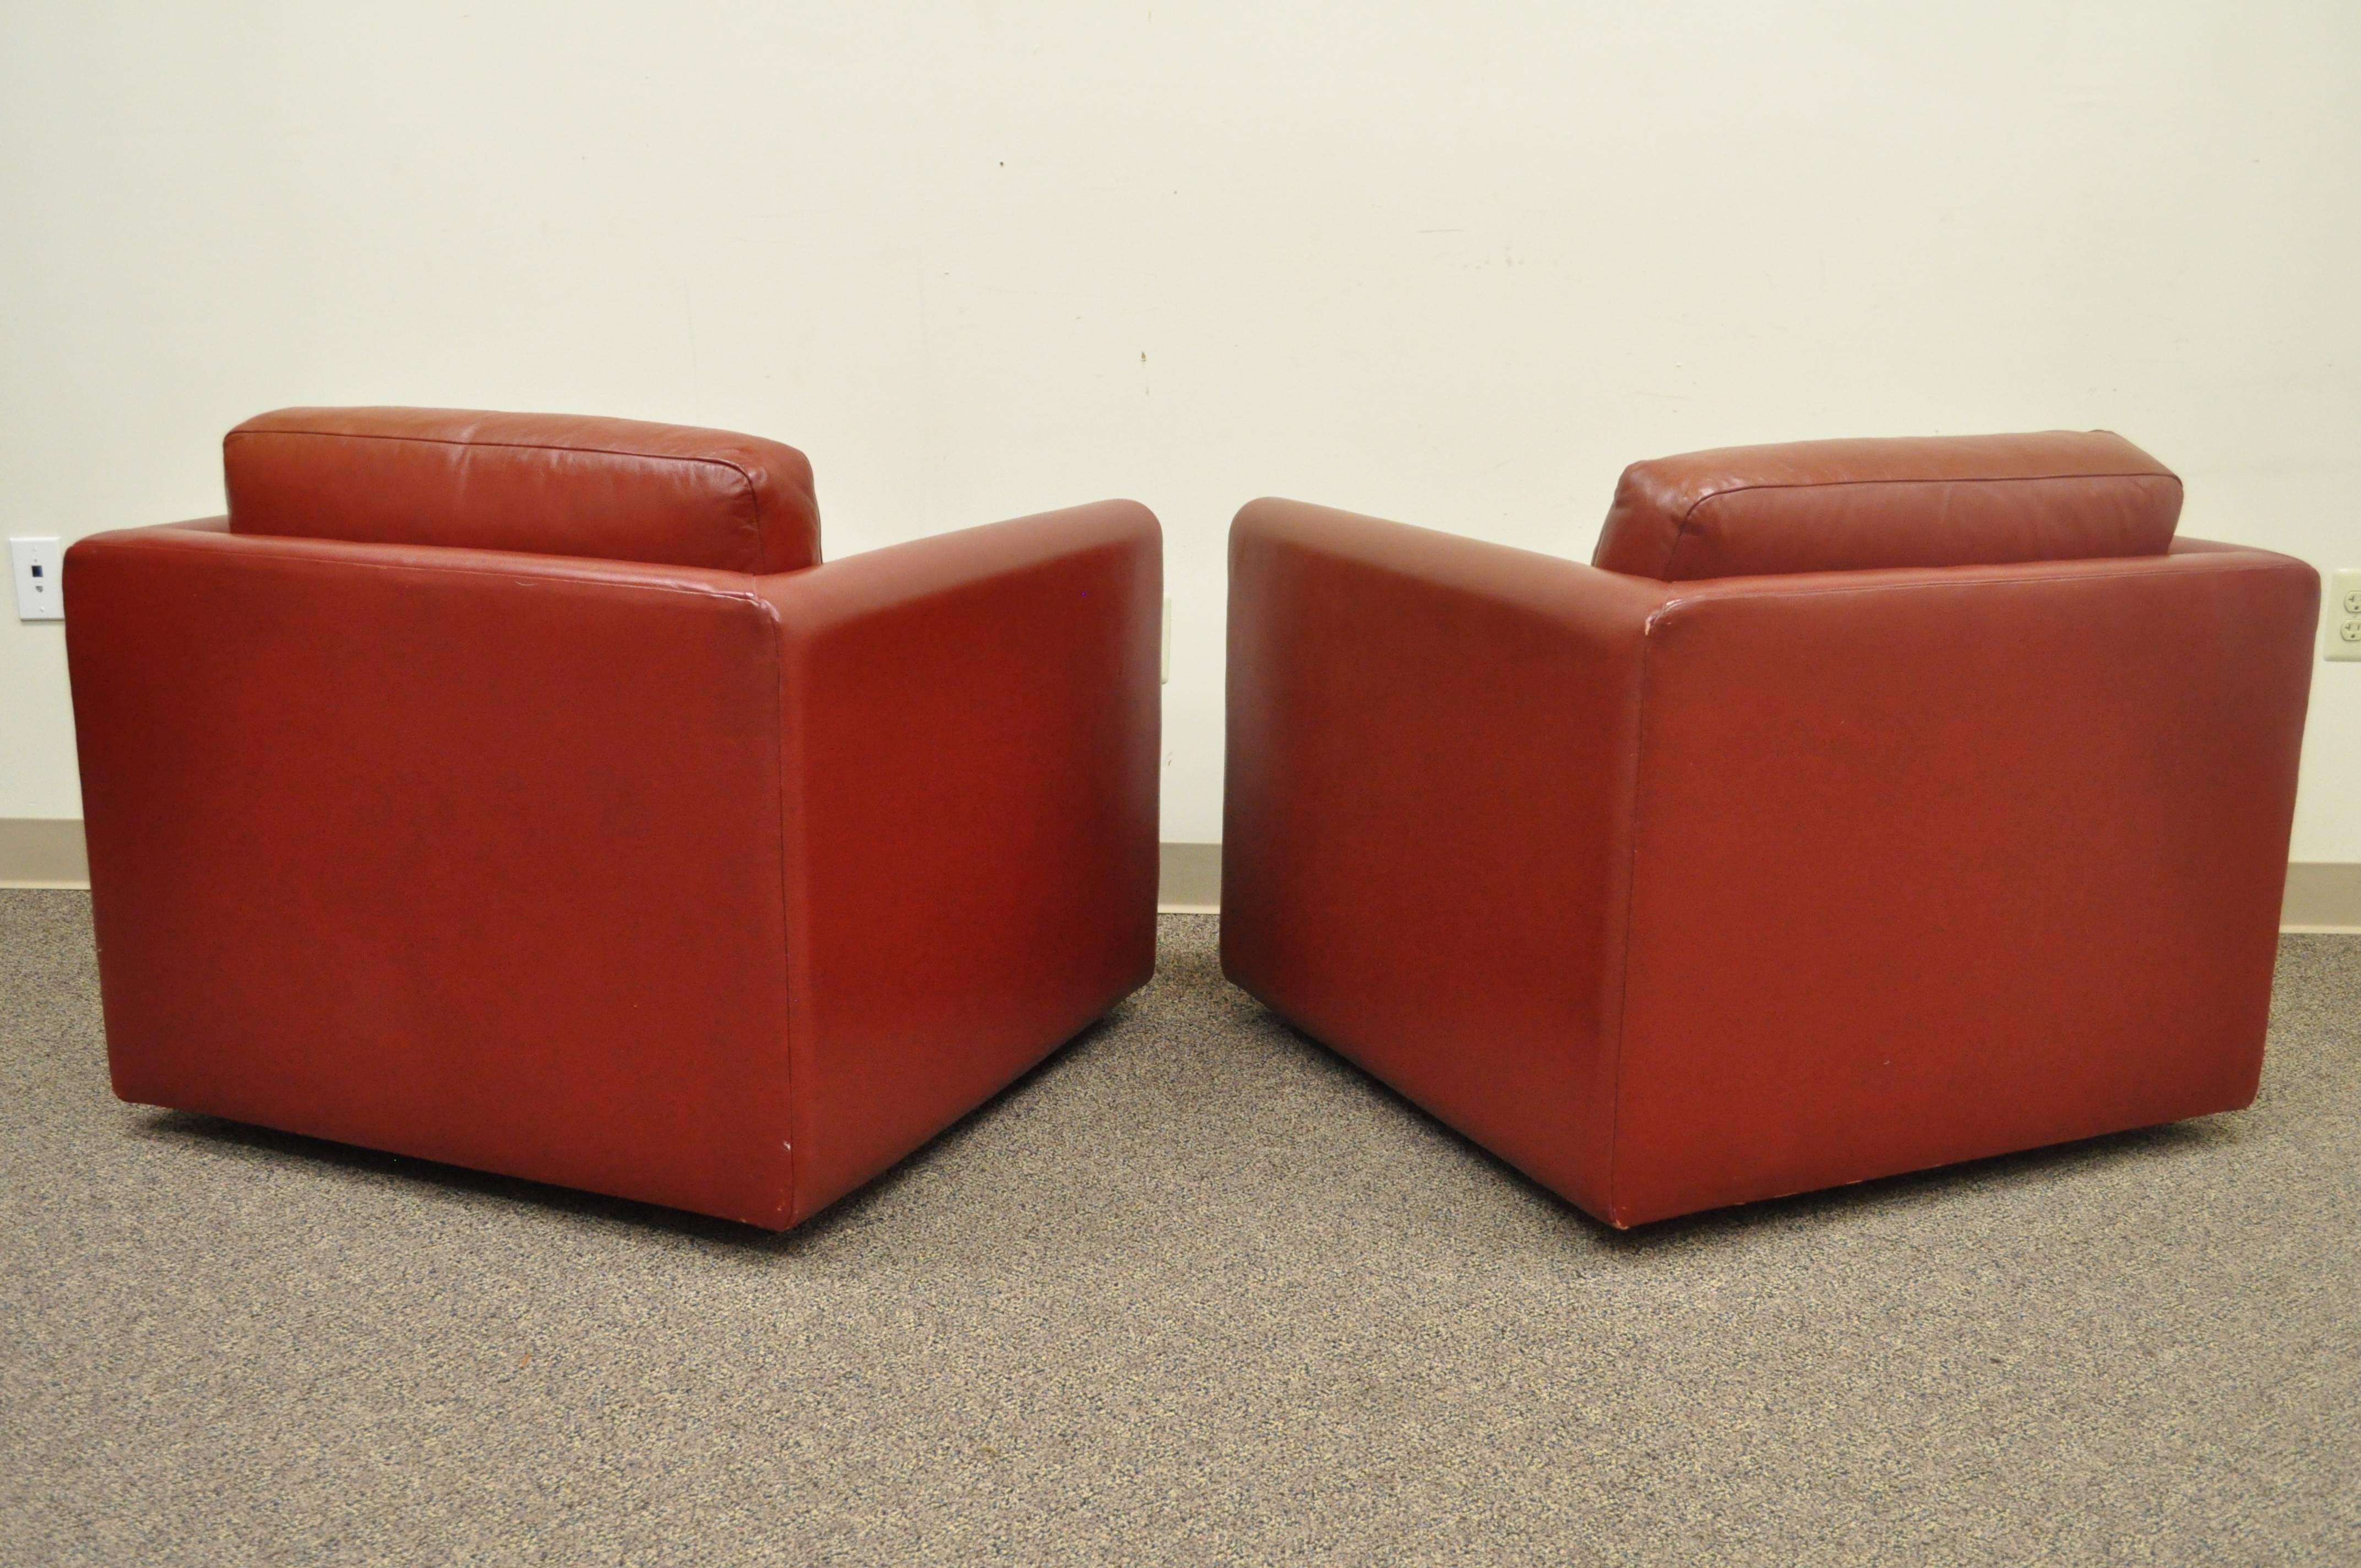 Late 20th Century Pair of Red Leather Cube Club or Lounge Chairs on Casters